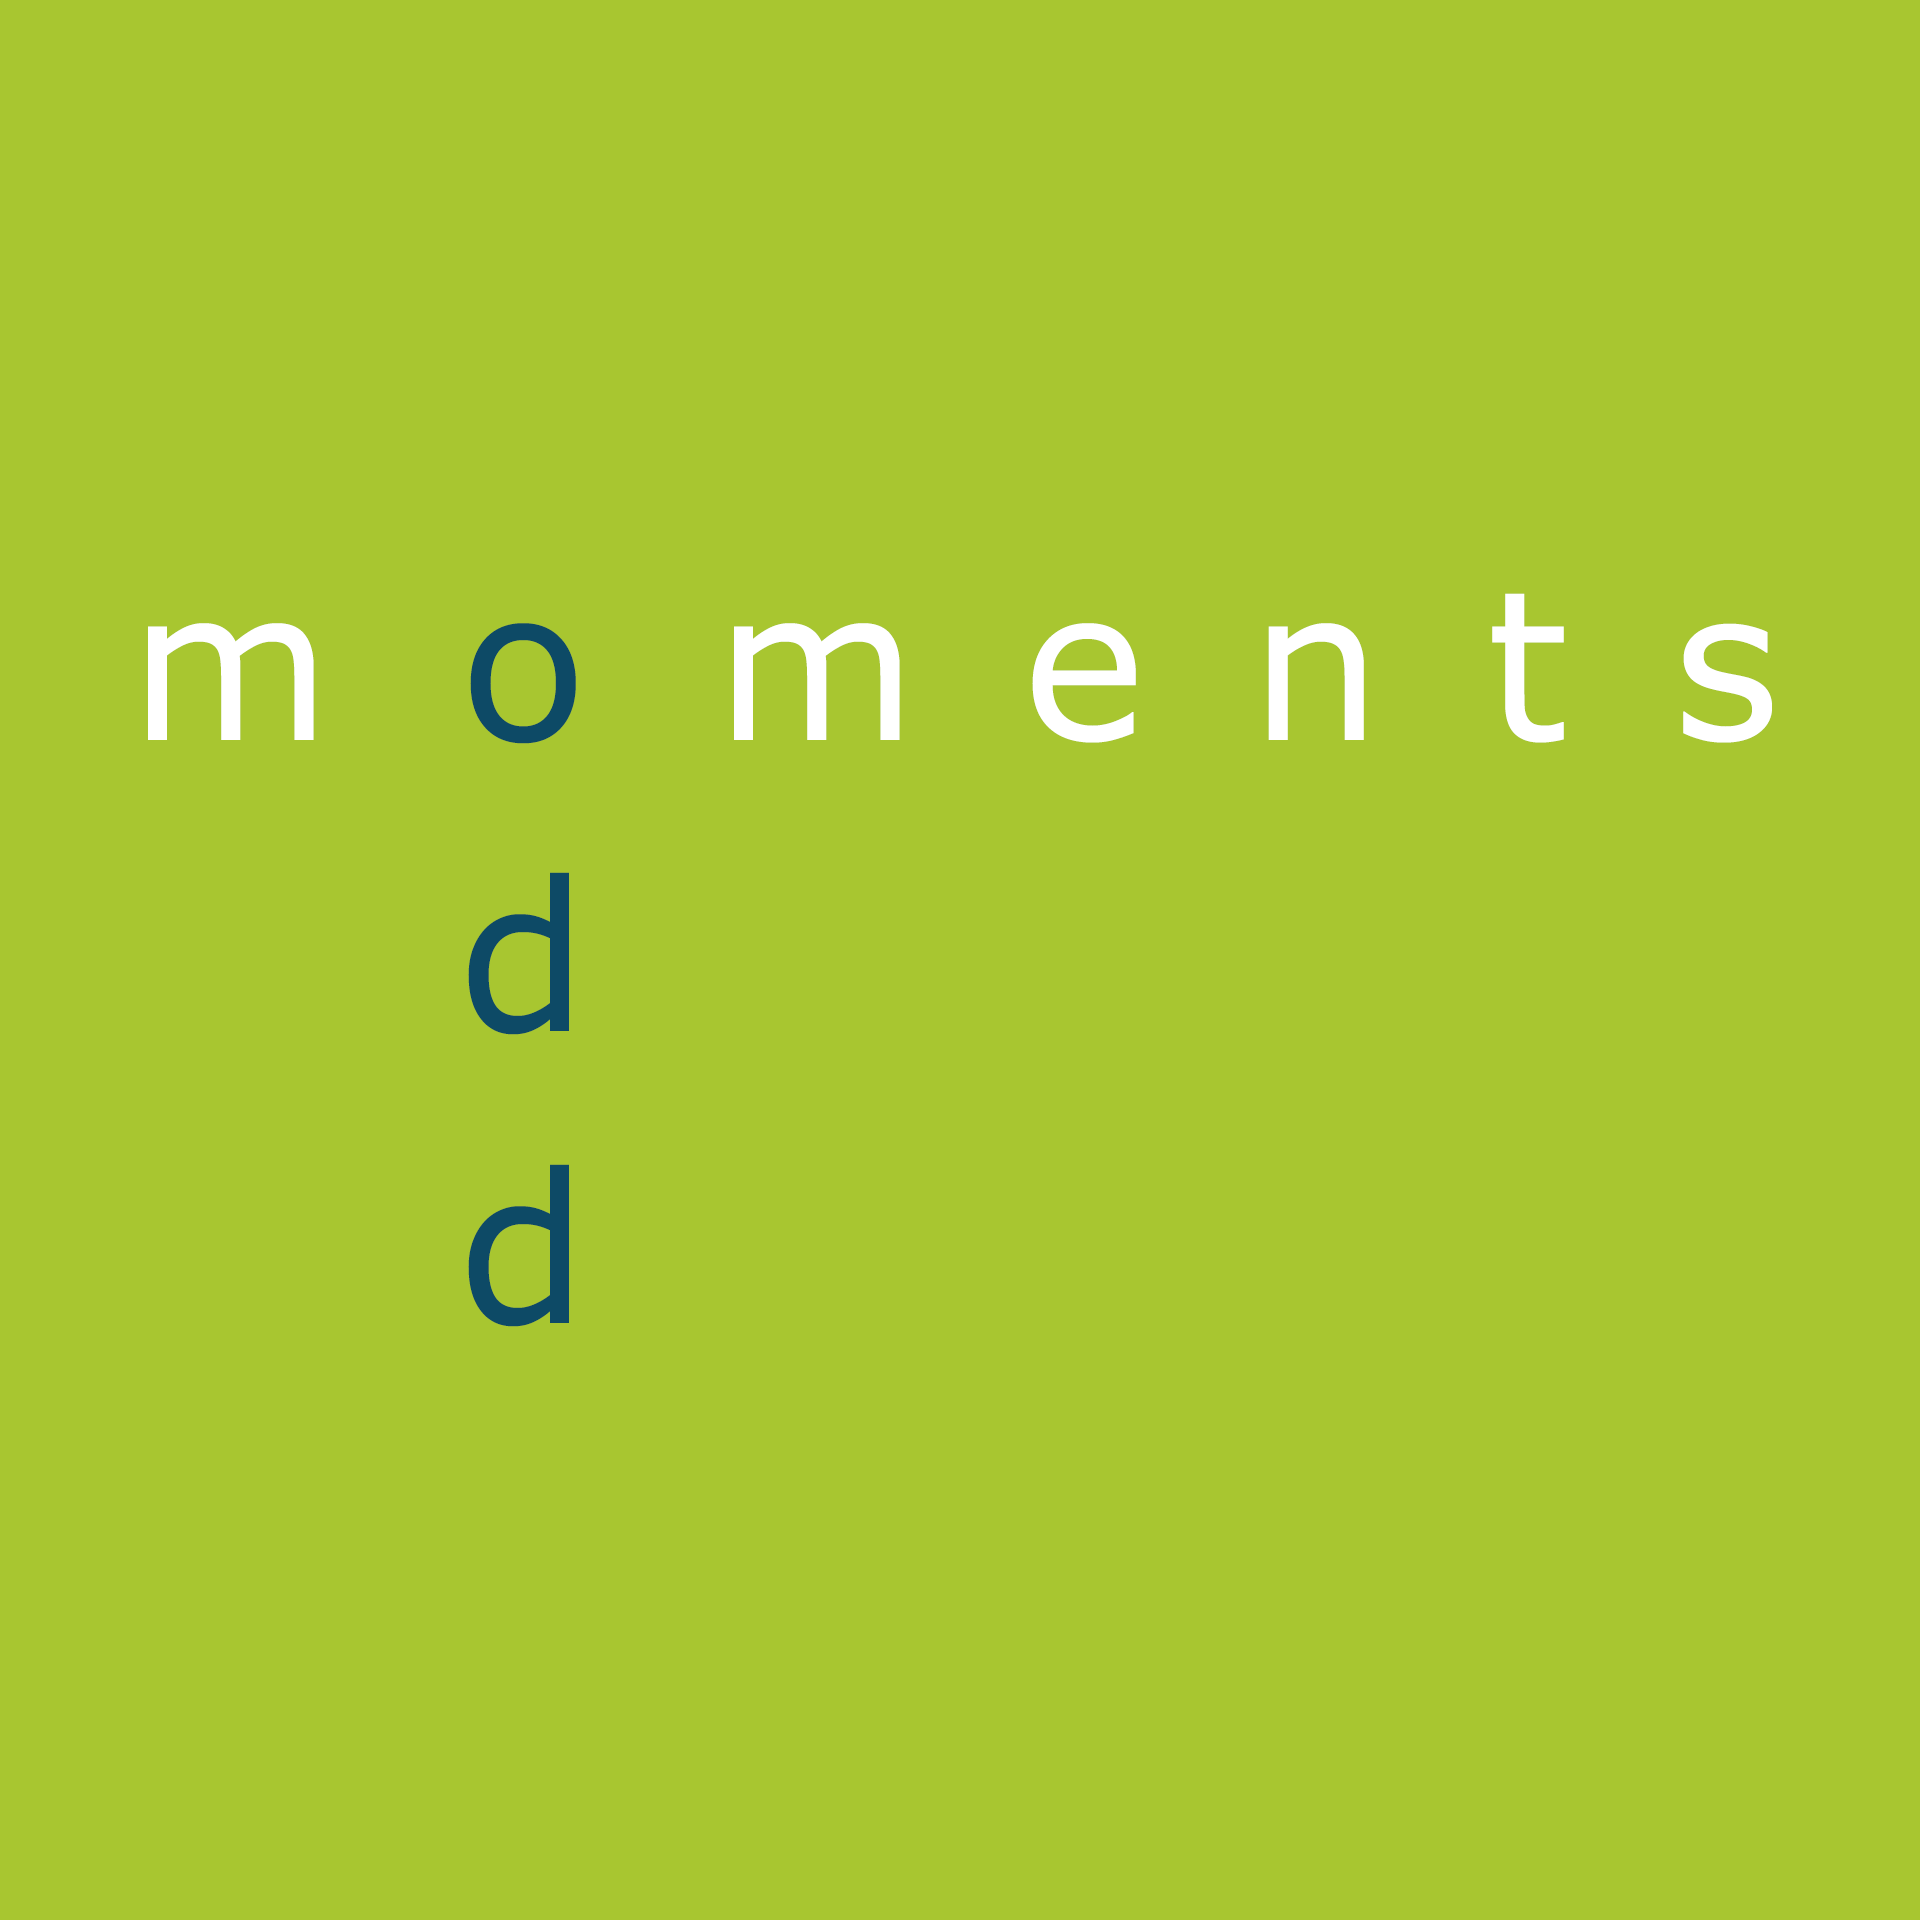 oddmoments.no